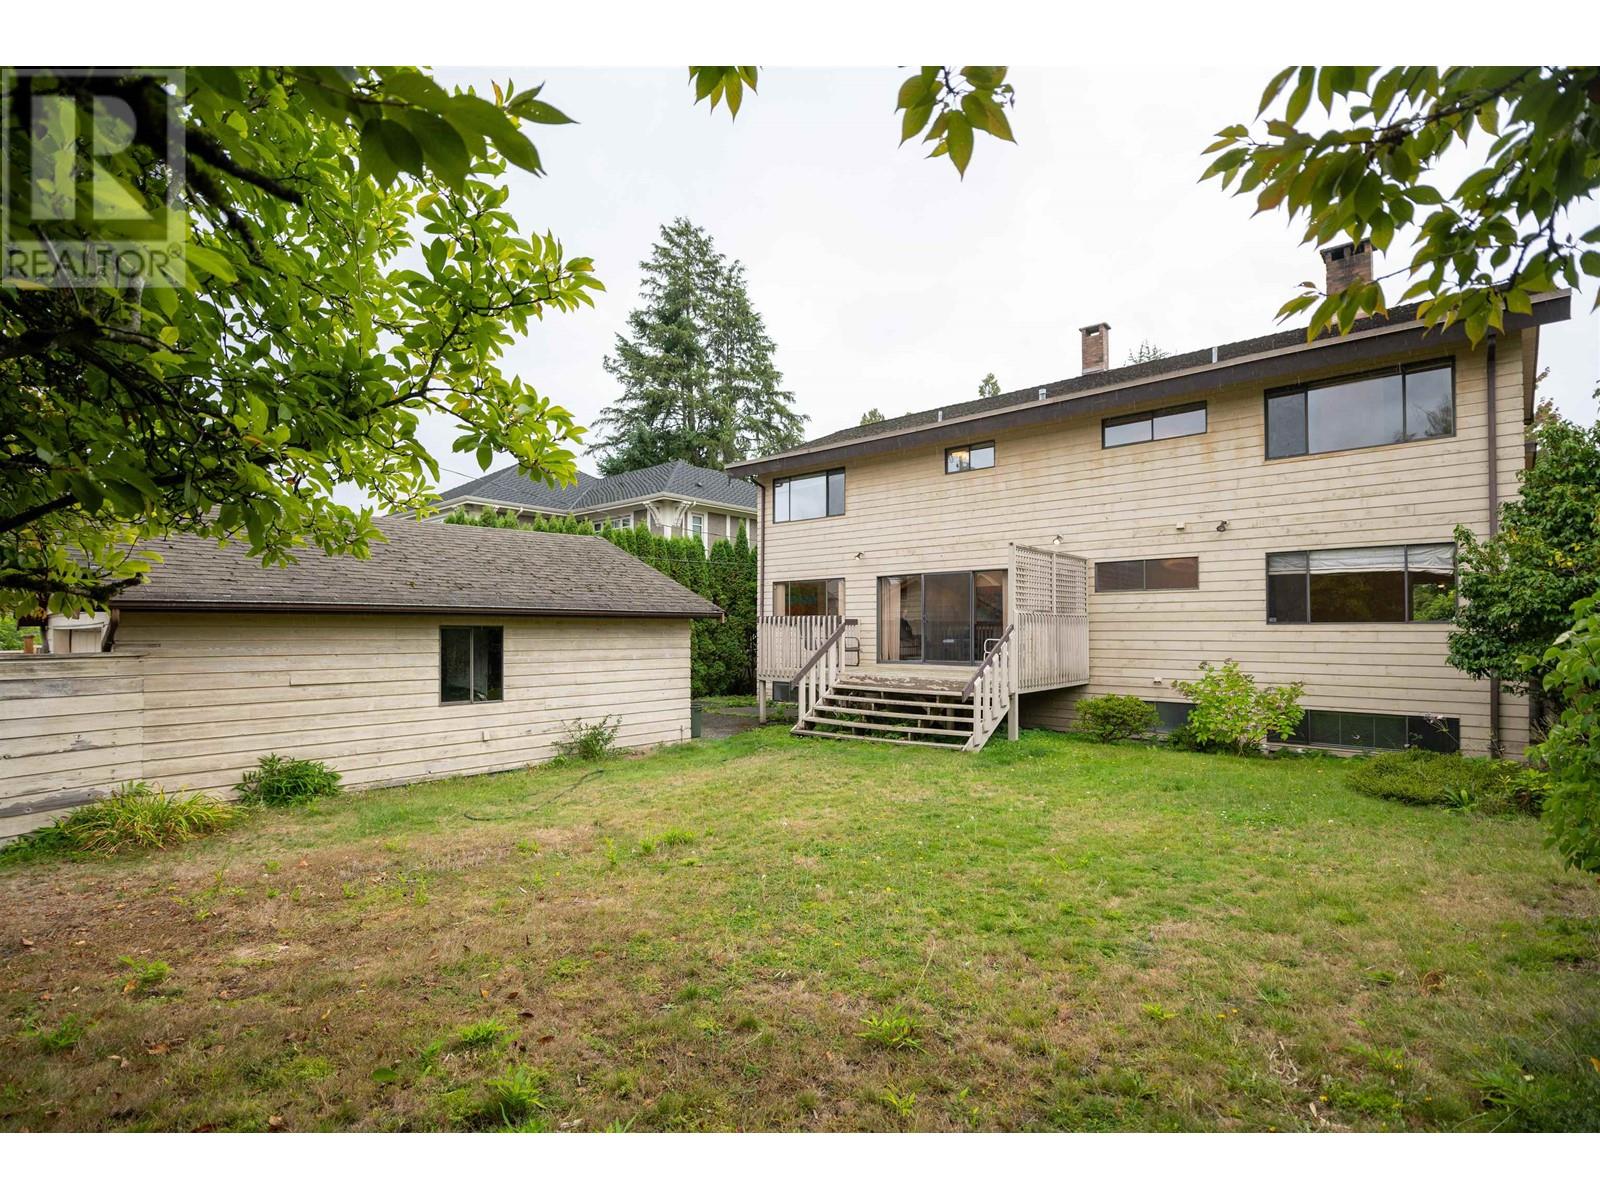 Listing Picture 26 of 29 : 1249 W 39TH AVENUE, Vancouver / 溫哥華 - 魯藝地產 Yvonne Lu Group - MLS Medallion Club Member